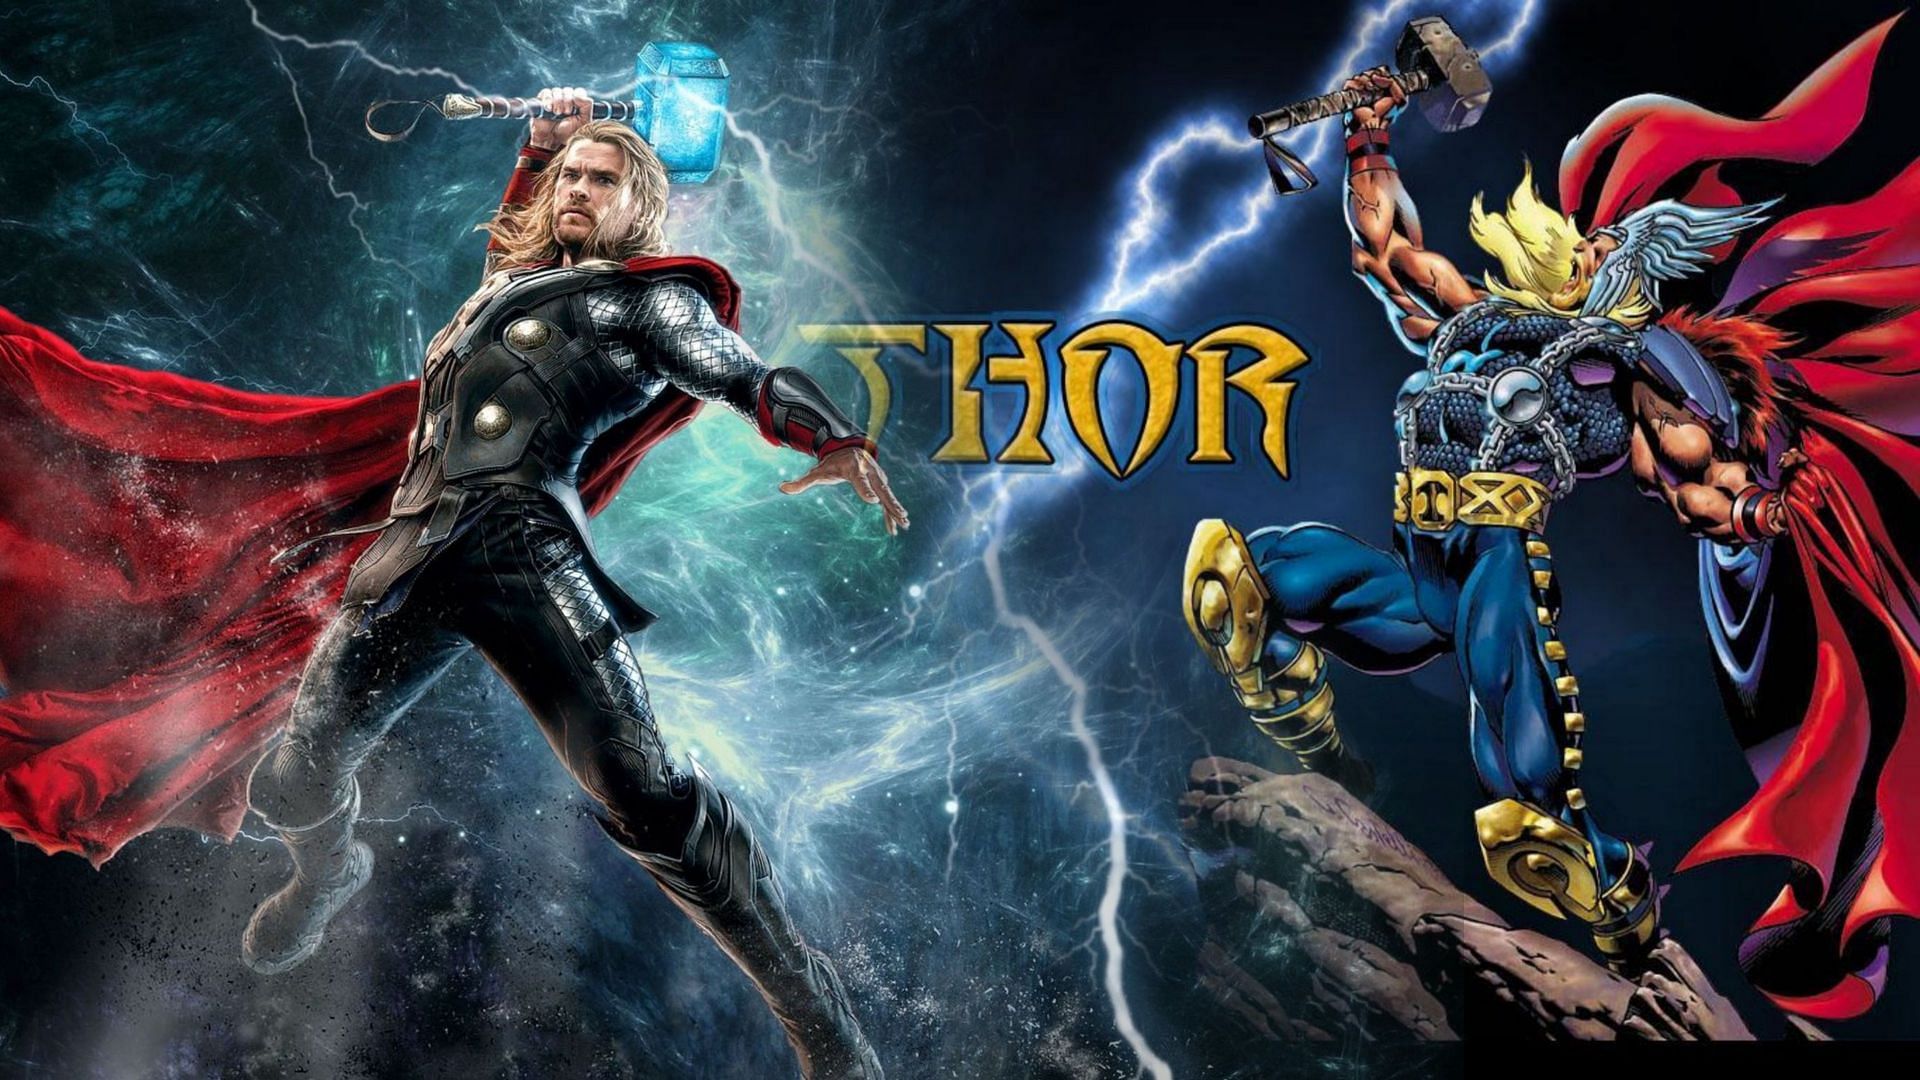 Norse mythology and Marvel may seem worlds apart, but at their core, they share one iconic hero: Thor, the God of Thunder. (Image Via Sportskeeda)